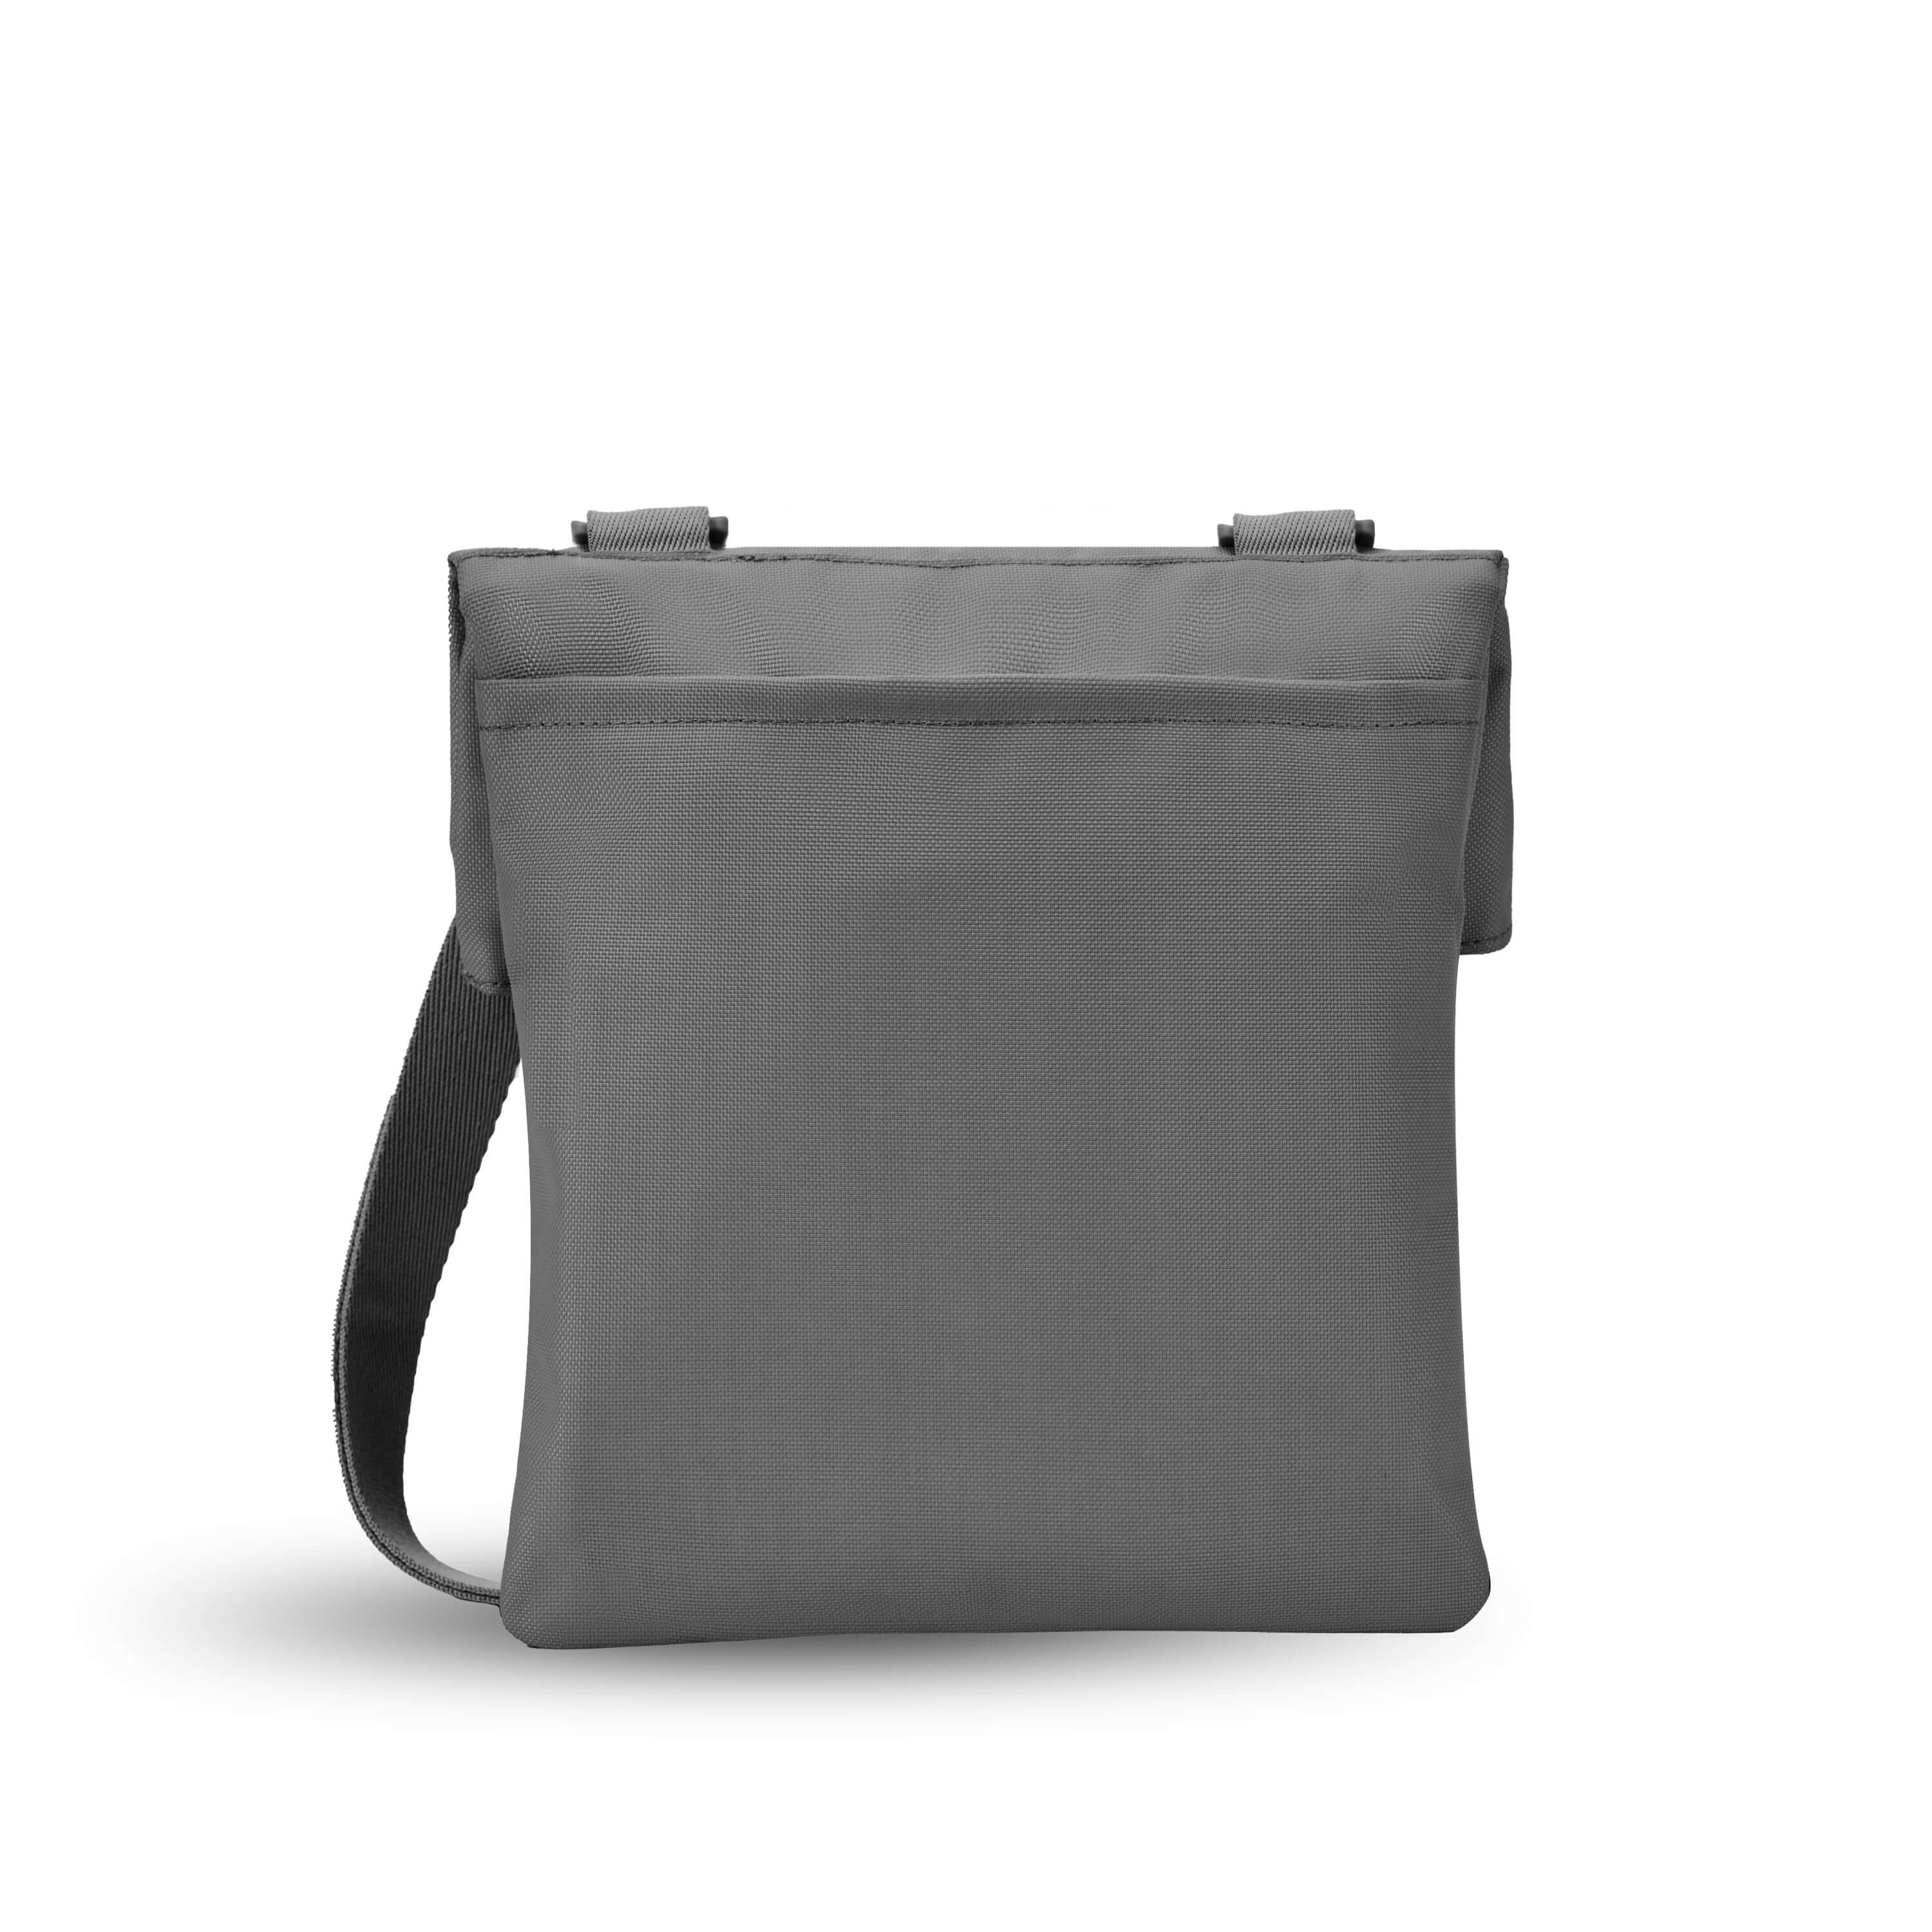 Back view of Sherpani crossbody, the Pica in Stone. The back of the bag features an external pouch.